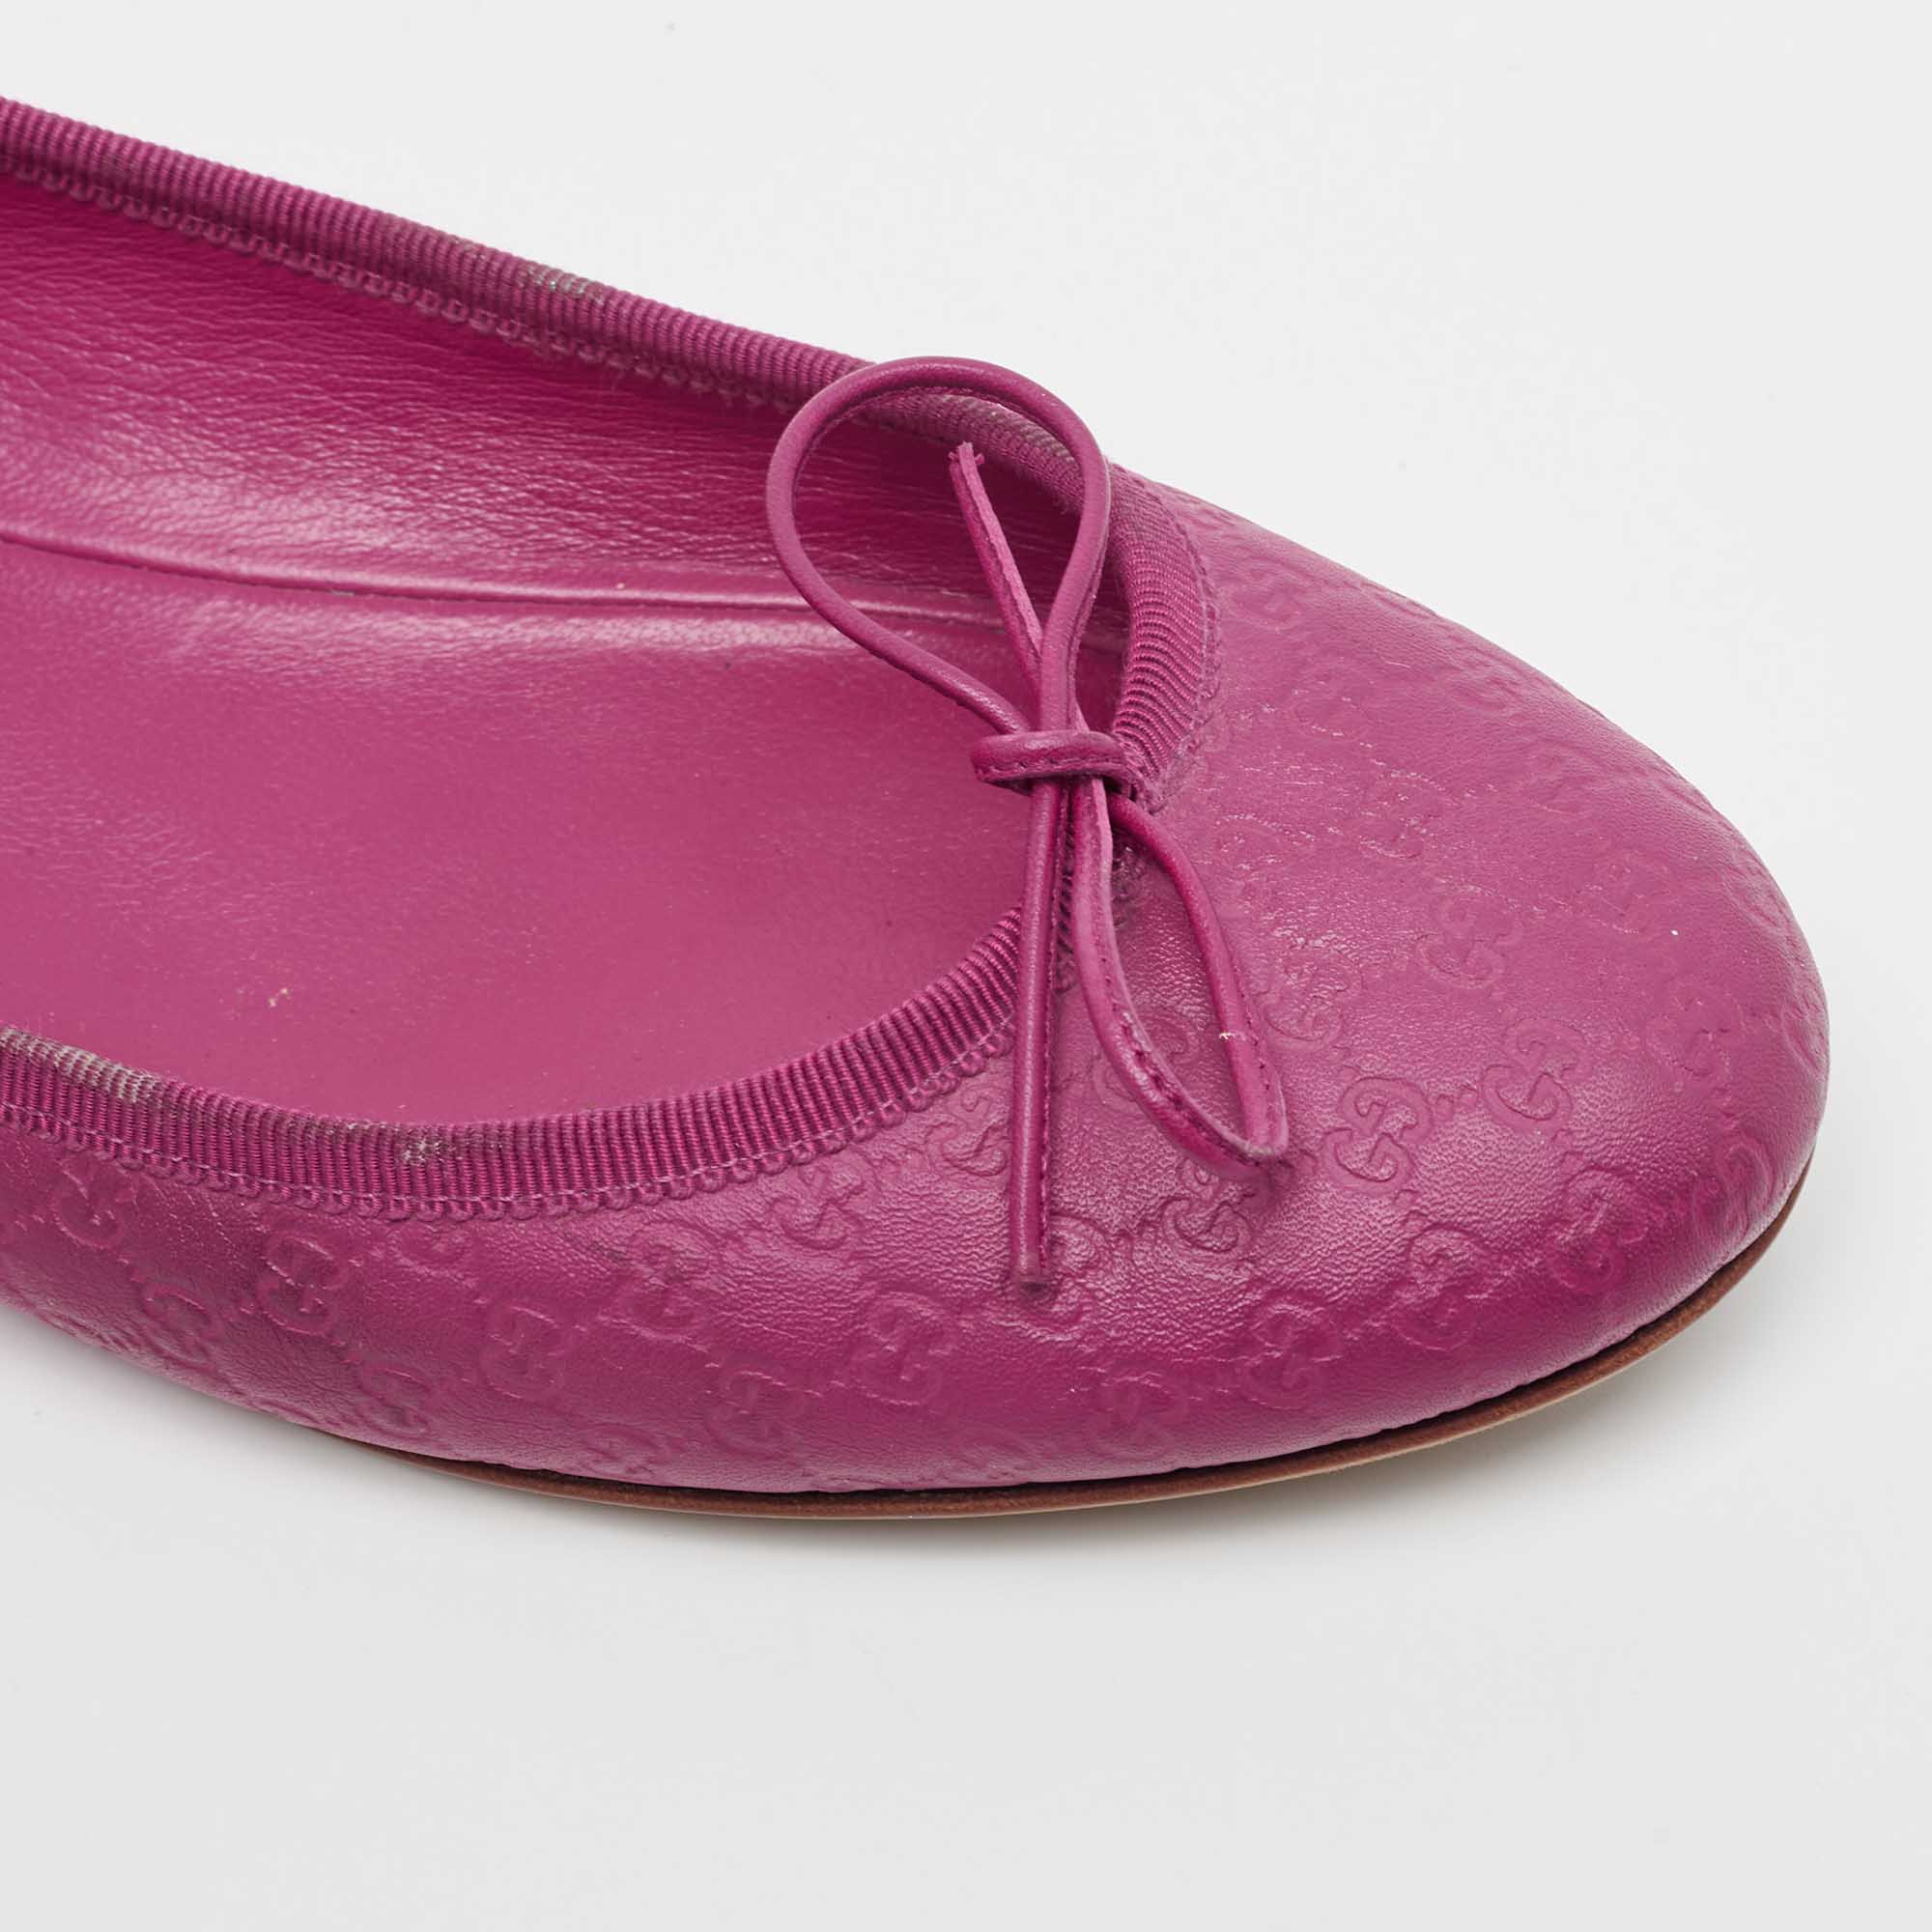 Gucci Purple Leather Microguccissima Bow Detail Ballet Flats Size 40